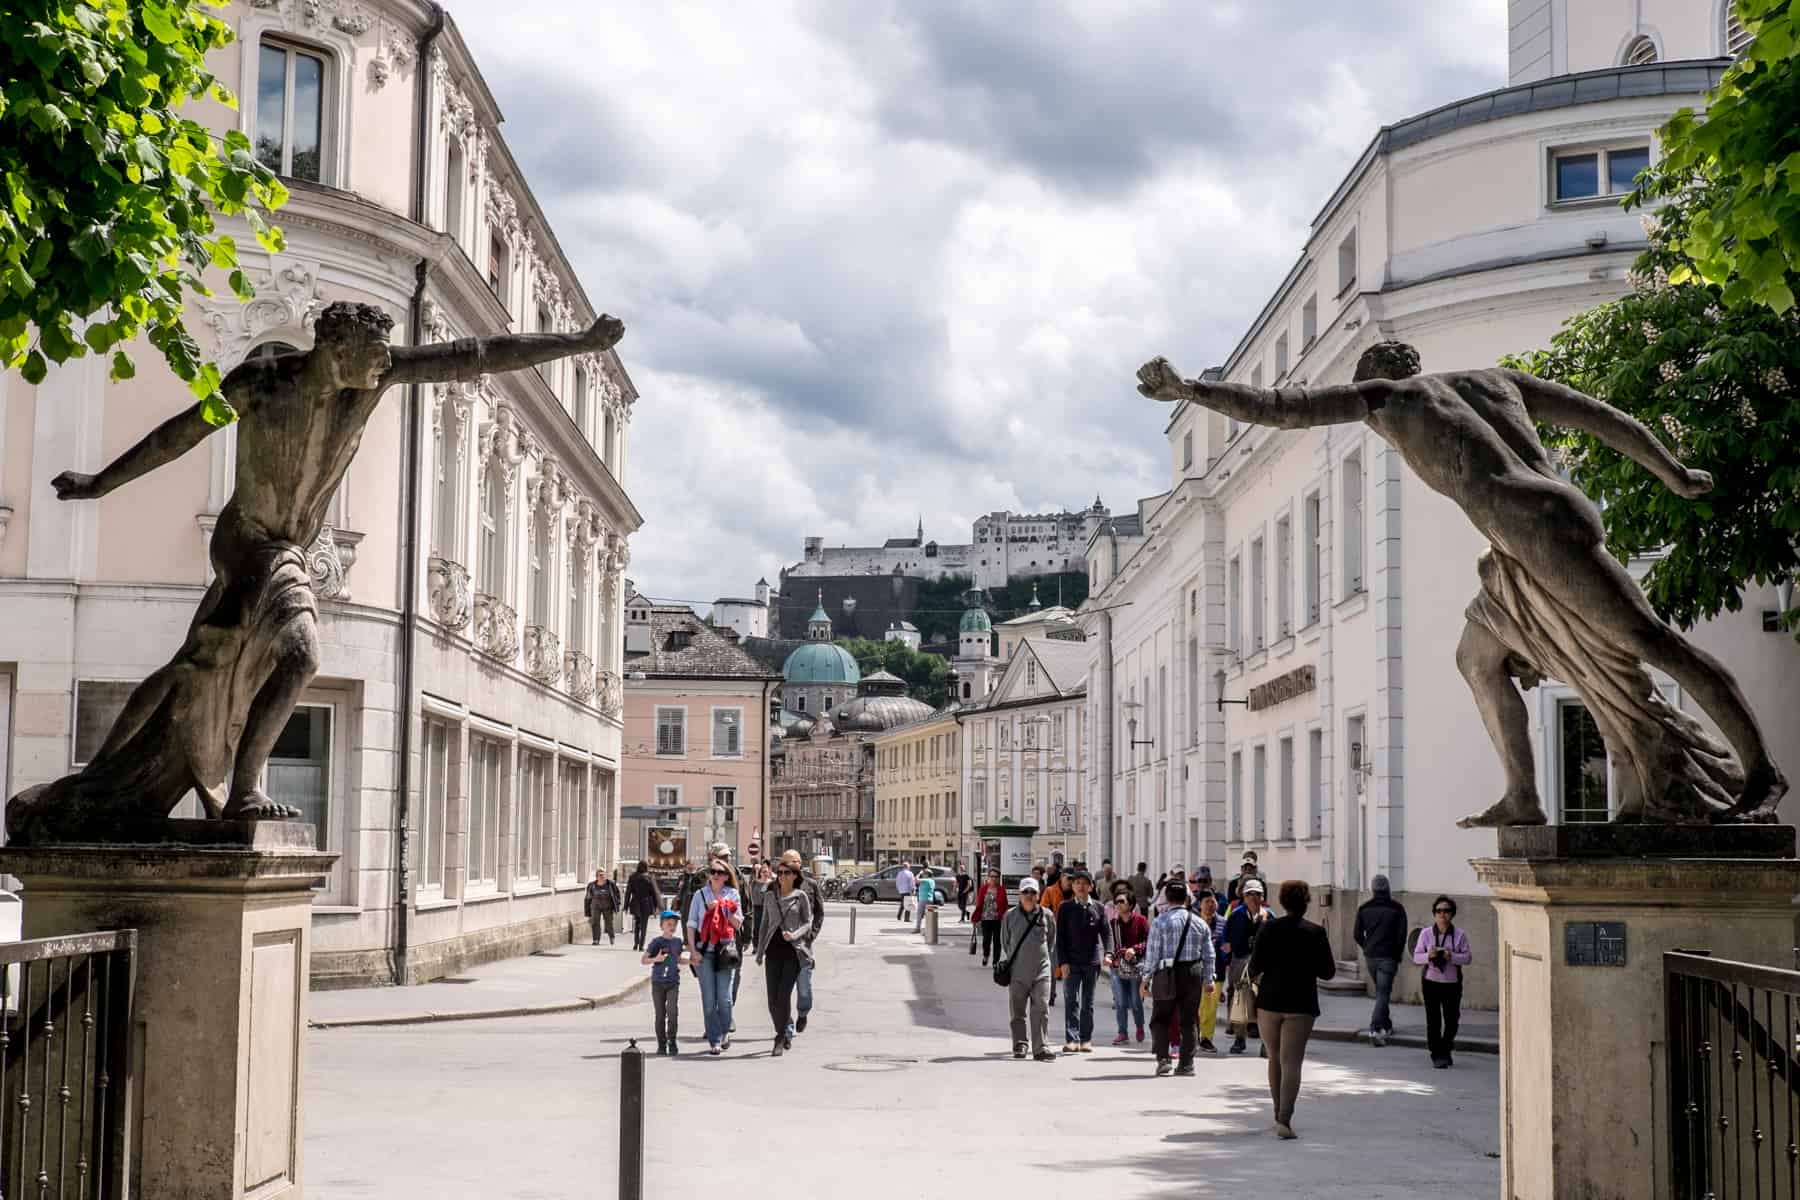 Two tall statues with arms outstretched are the decor on the Gate of the Mirabell Gardens in Salzburg, Austria. In the distance is the hilltop fortress. 